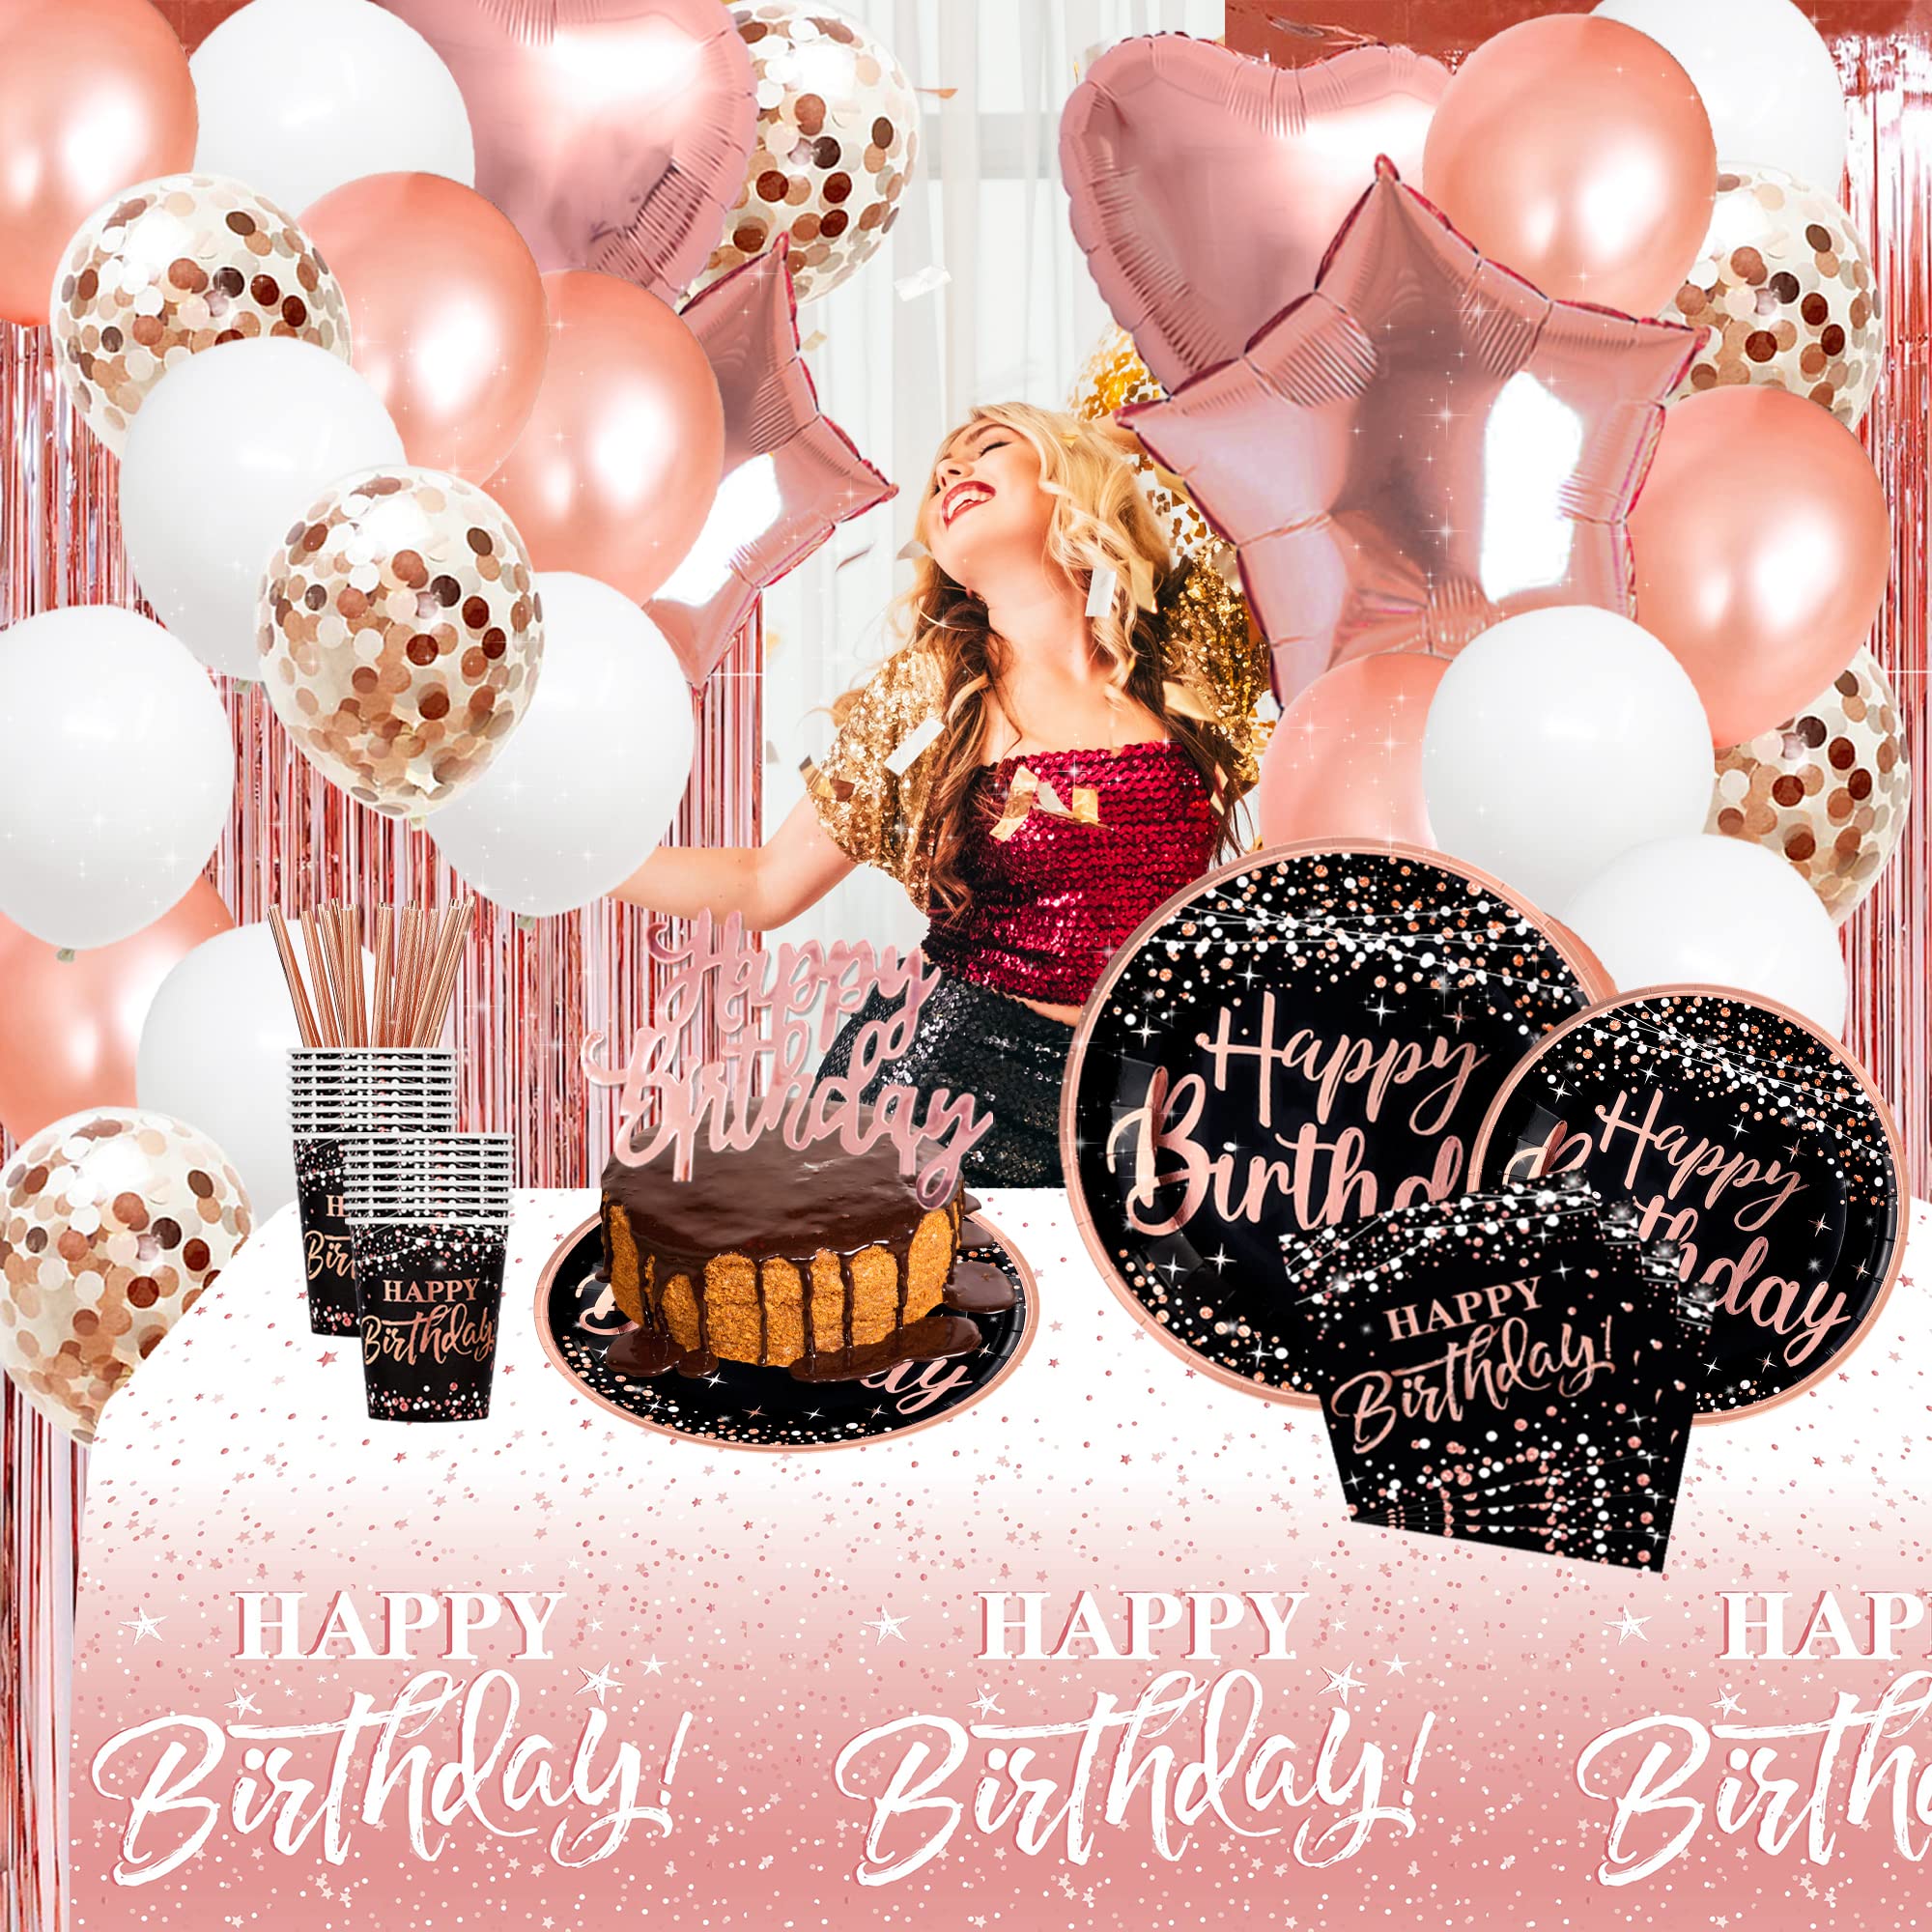 birthday decorations for women rose gold - (Total 170pcs) happy birthday Supplies for women, Balloons,tablecloth,Foil Backdrops,Plates,Cups,Photo Props,Sash,Tableware for 24 Guests